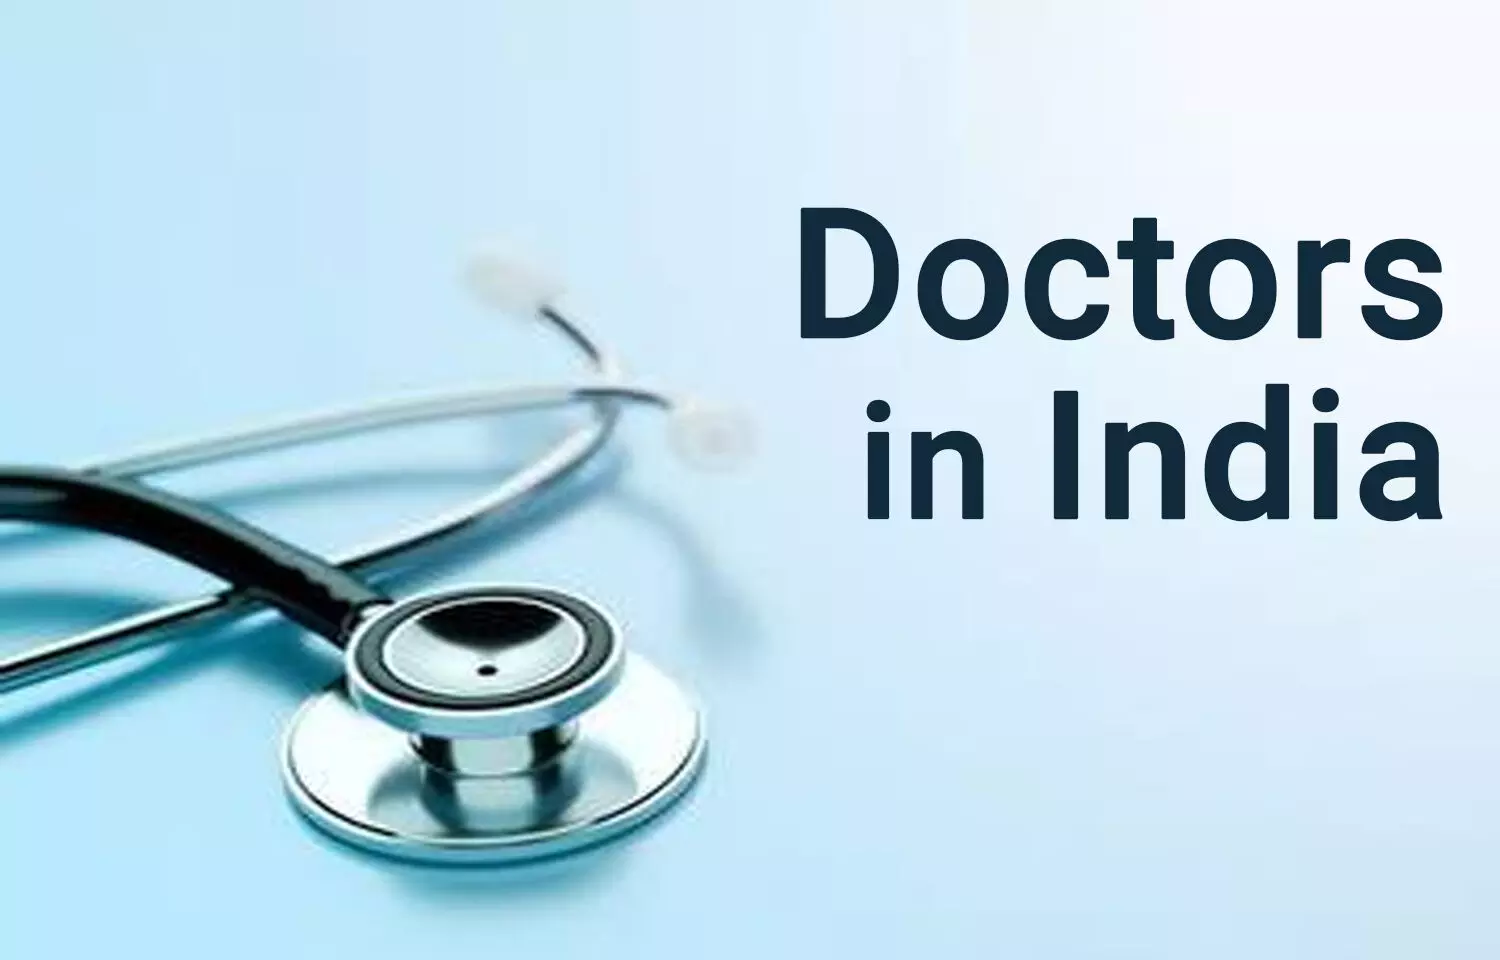 Health Ministry Counts 13,01,319 Allopathic Doctors, and 5.65 lakh AYUSH doctors in India